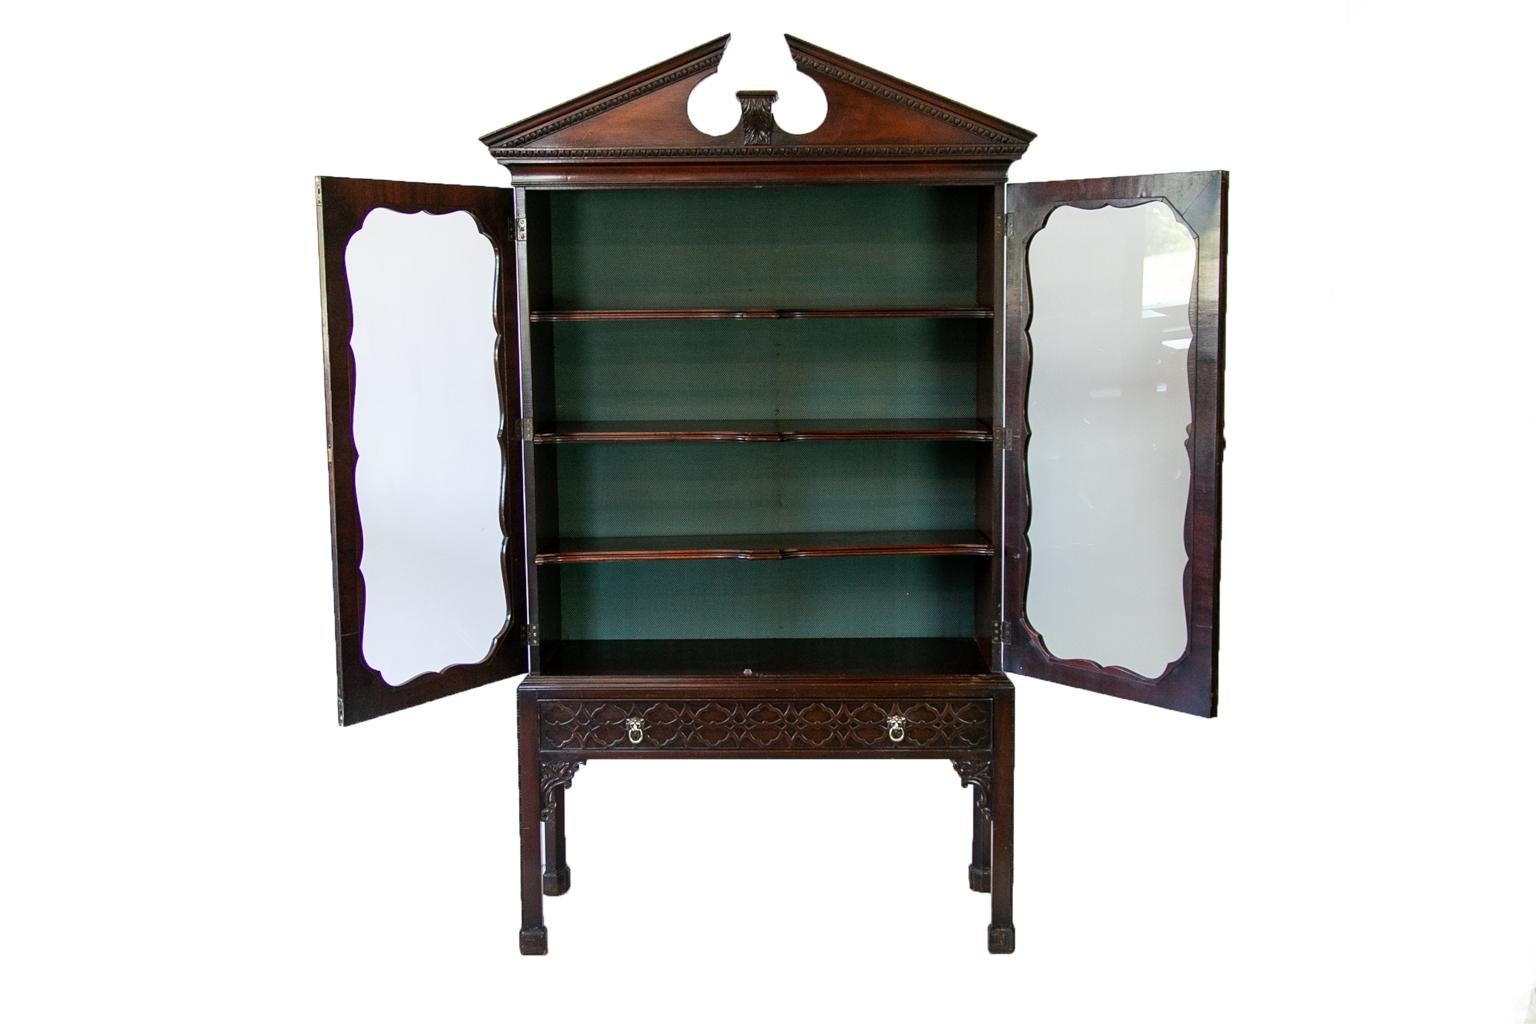 English George III Style Book/Display Cabinet has the original broken arch cornice that has carved egg and dart molding. The doors have cross banded, molded, and scalloped framing. There are carved floral corners. The lower section has one drawer